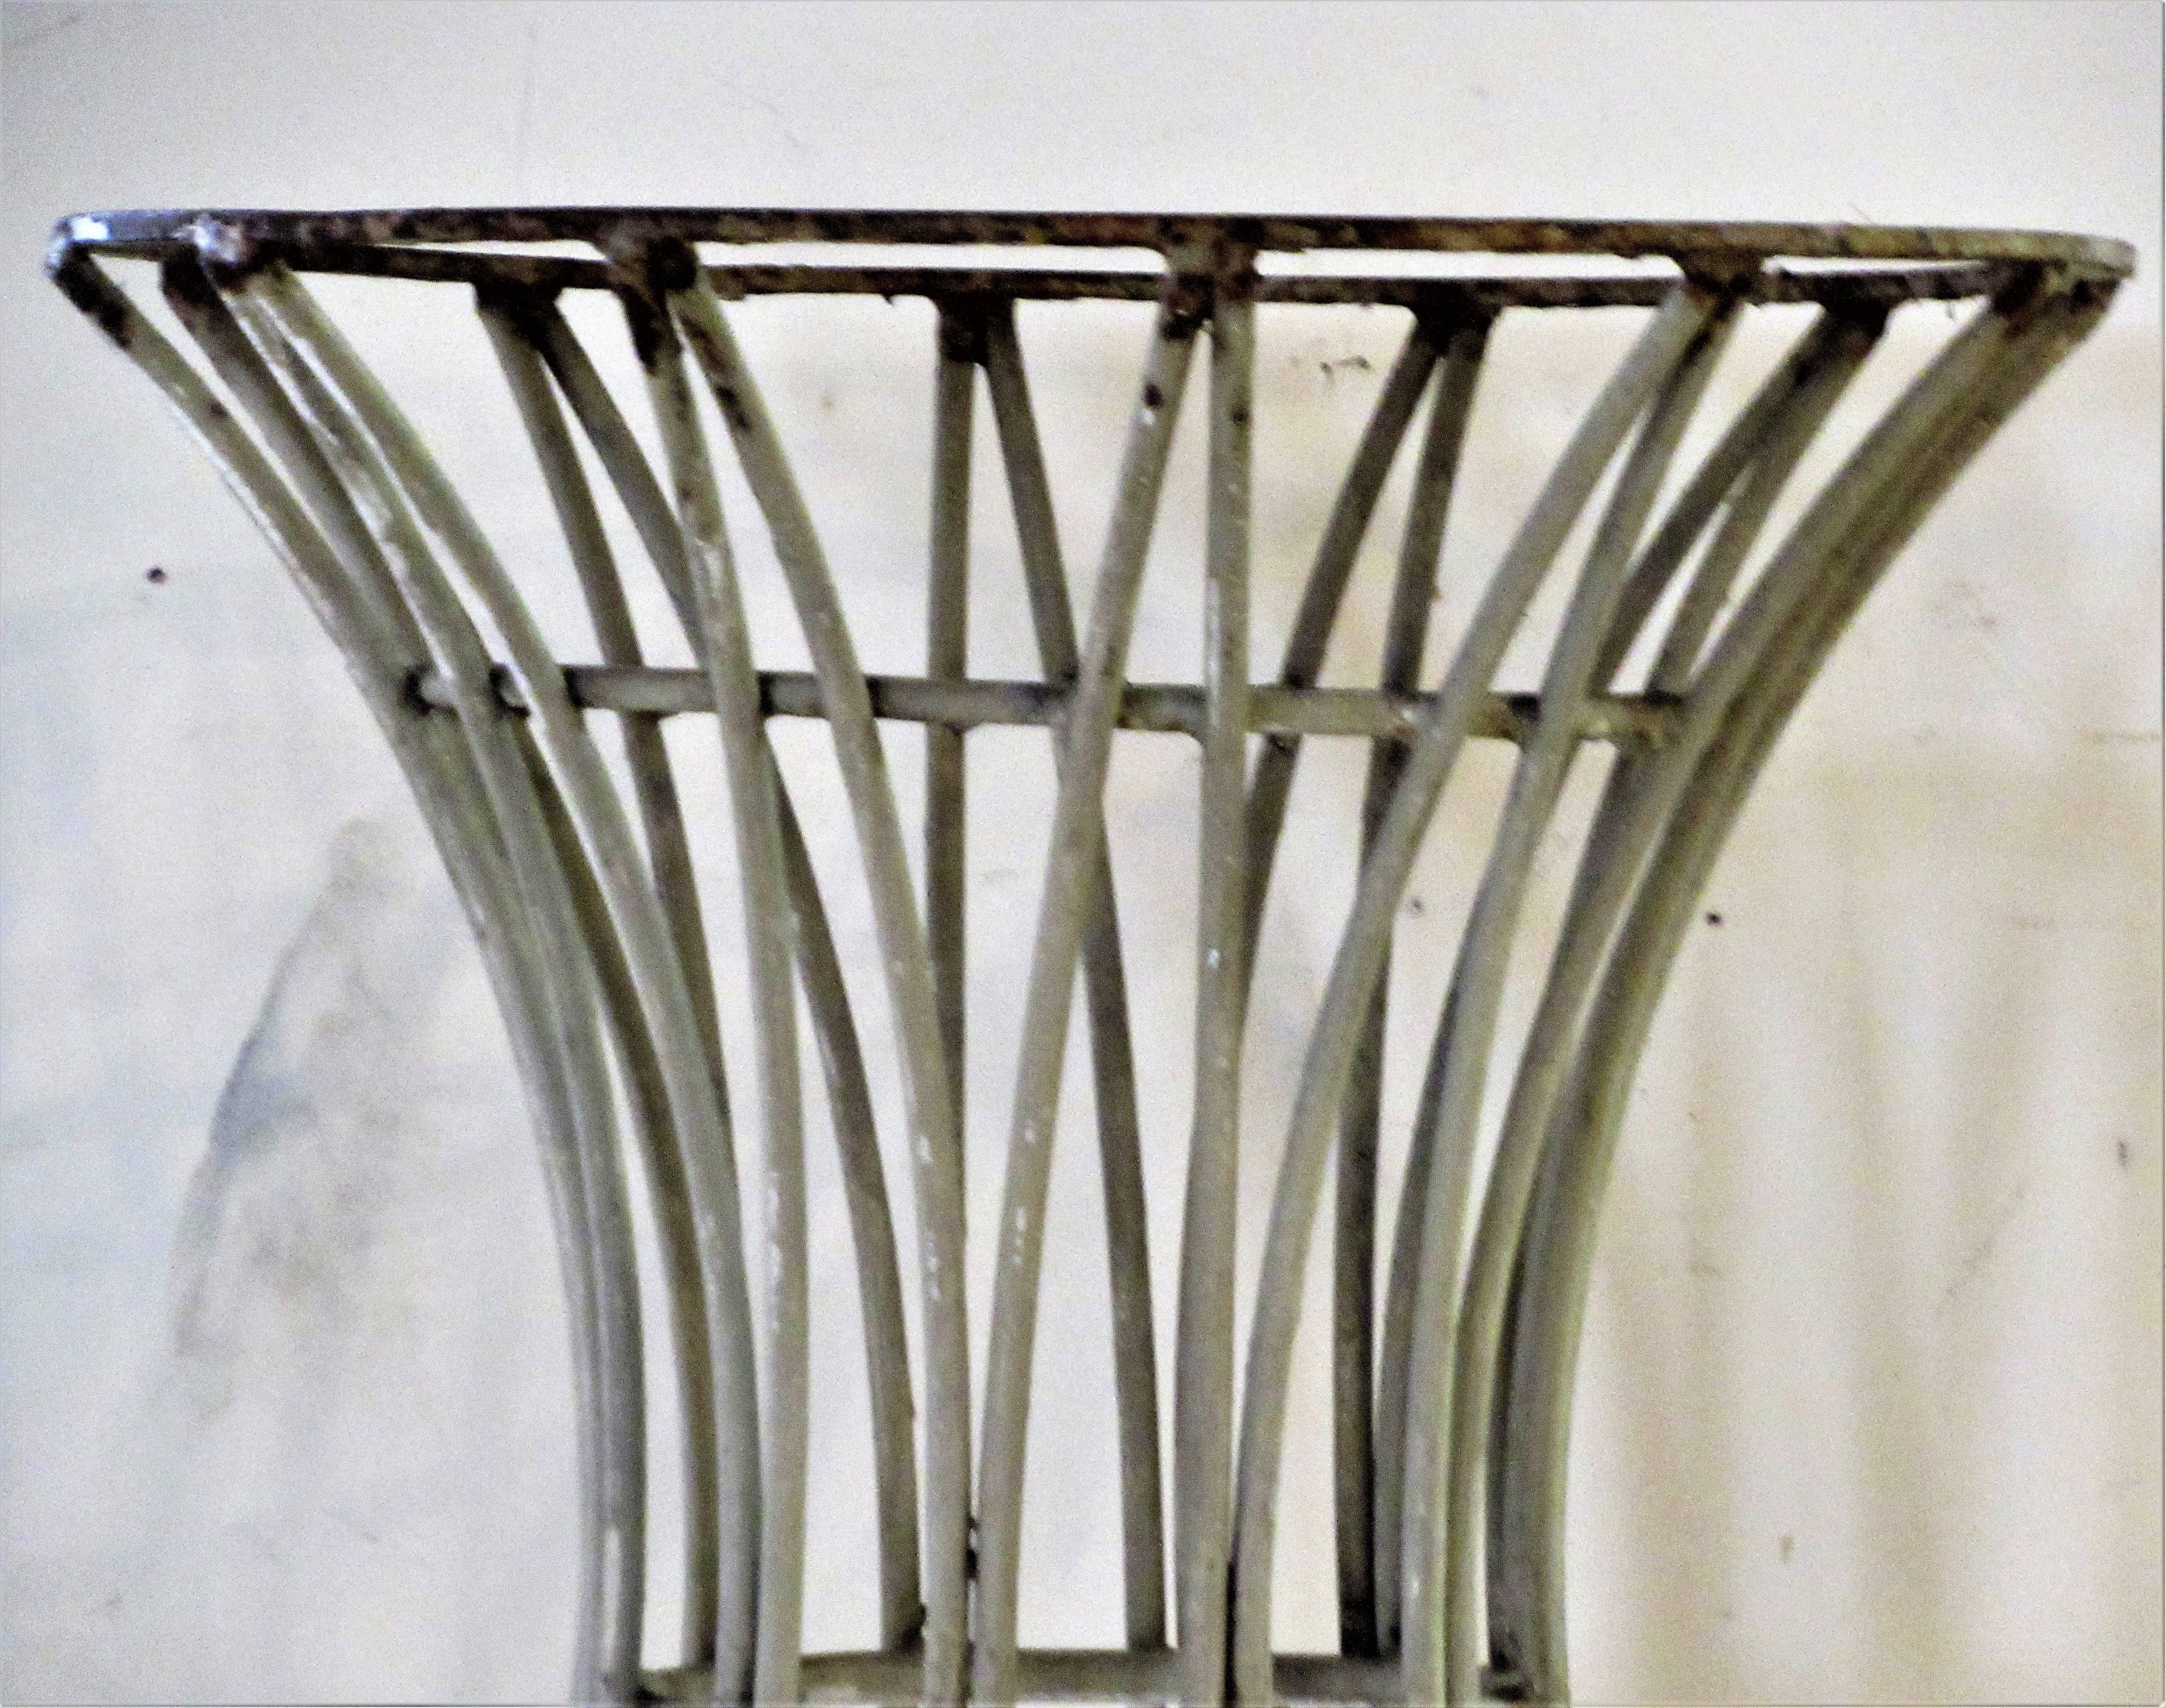 Mid-20th century sheaf of wheat style iron table base in aged old putty white painted surface with areas of rust and paint loss. Beautiful sculptural quality. Table base measures 18 1/2 inches across top / 25 1/2 inches across bottom x 26 3/4 inches